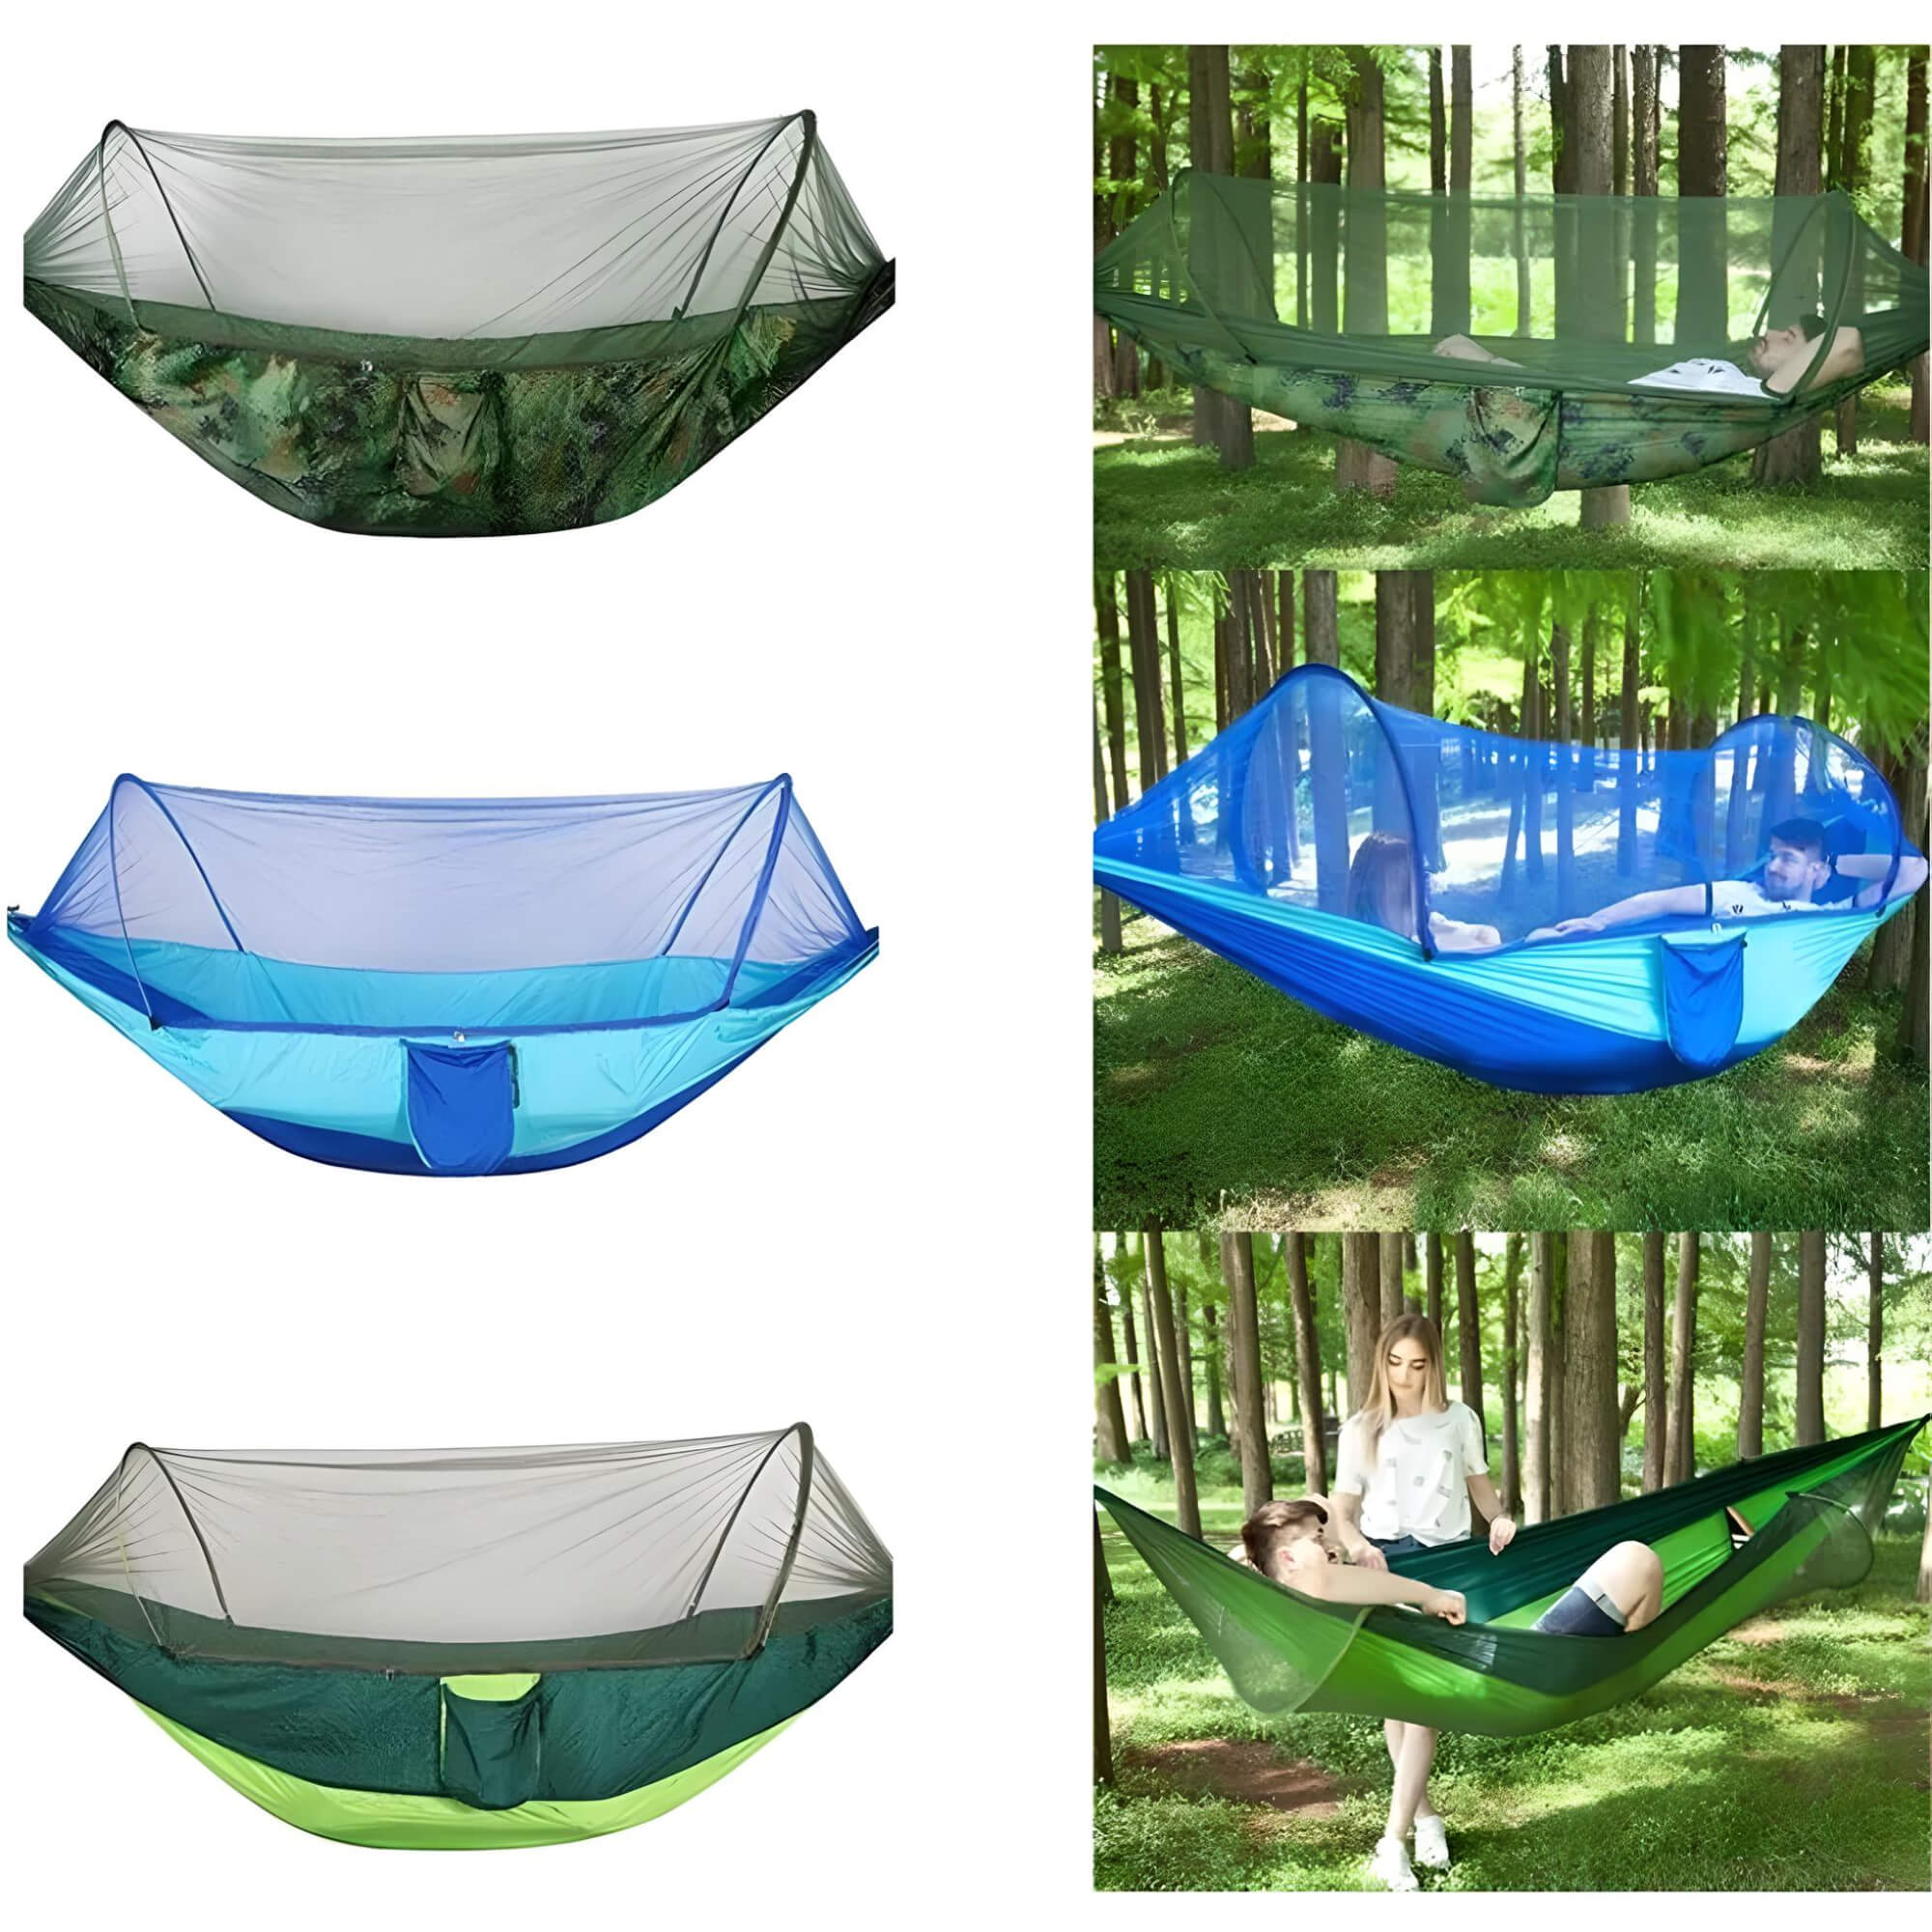 camping-hammock-with-mosquito-net-tricolour